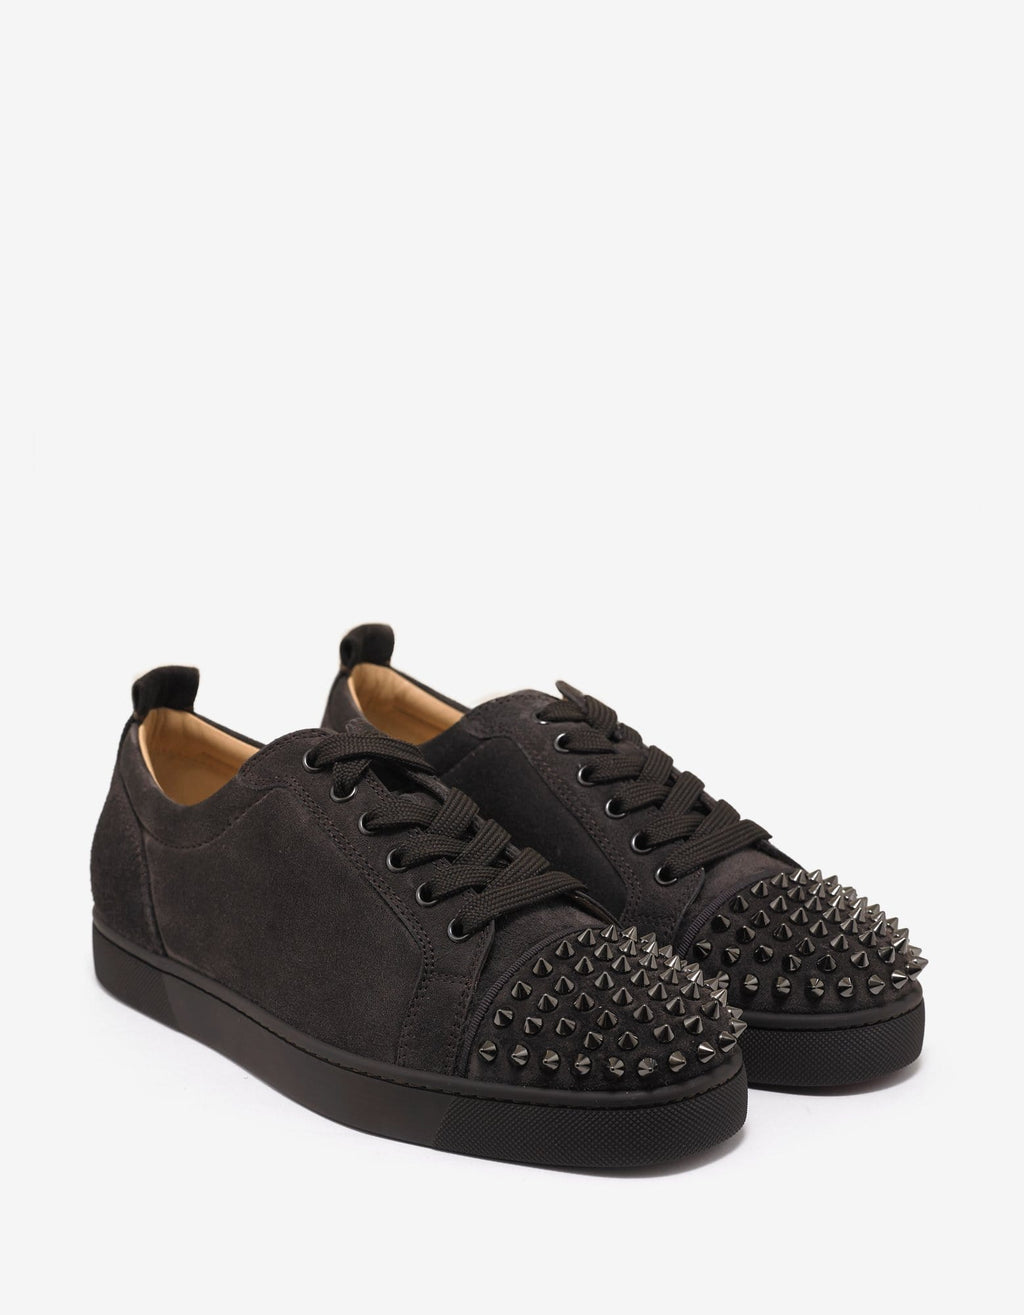 Christian Louboutin Christian Louboutin Louis Junior Spikes Flat Réglisse Brown Suede Trainers